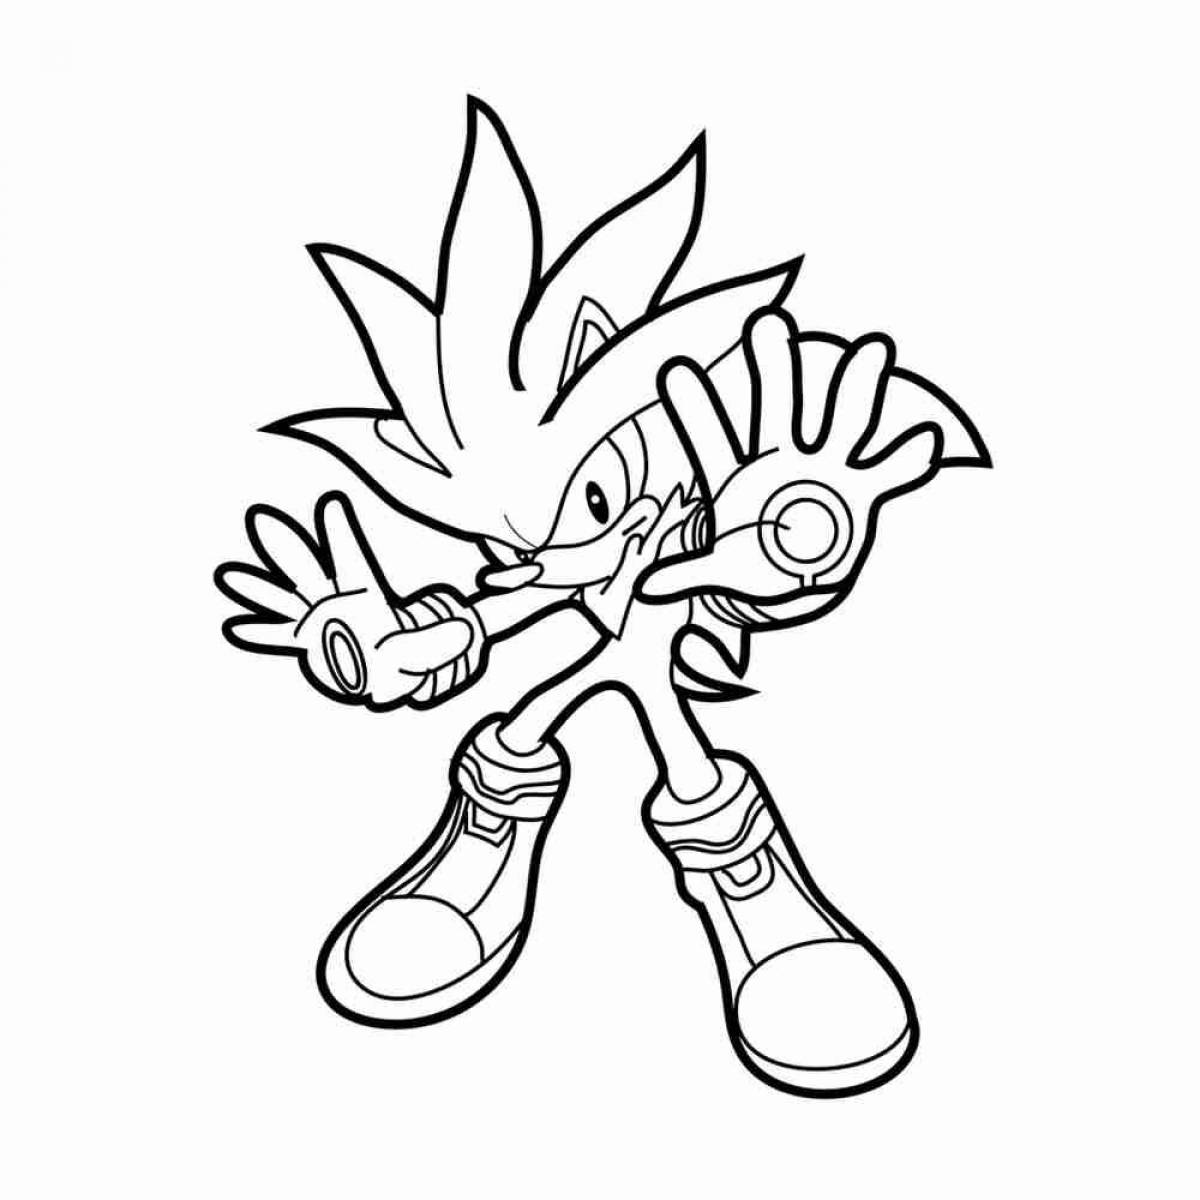 Sparkling sonic metal coloring